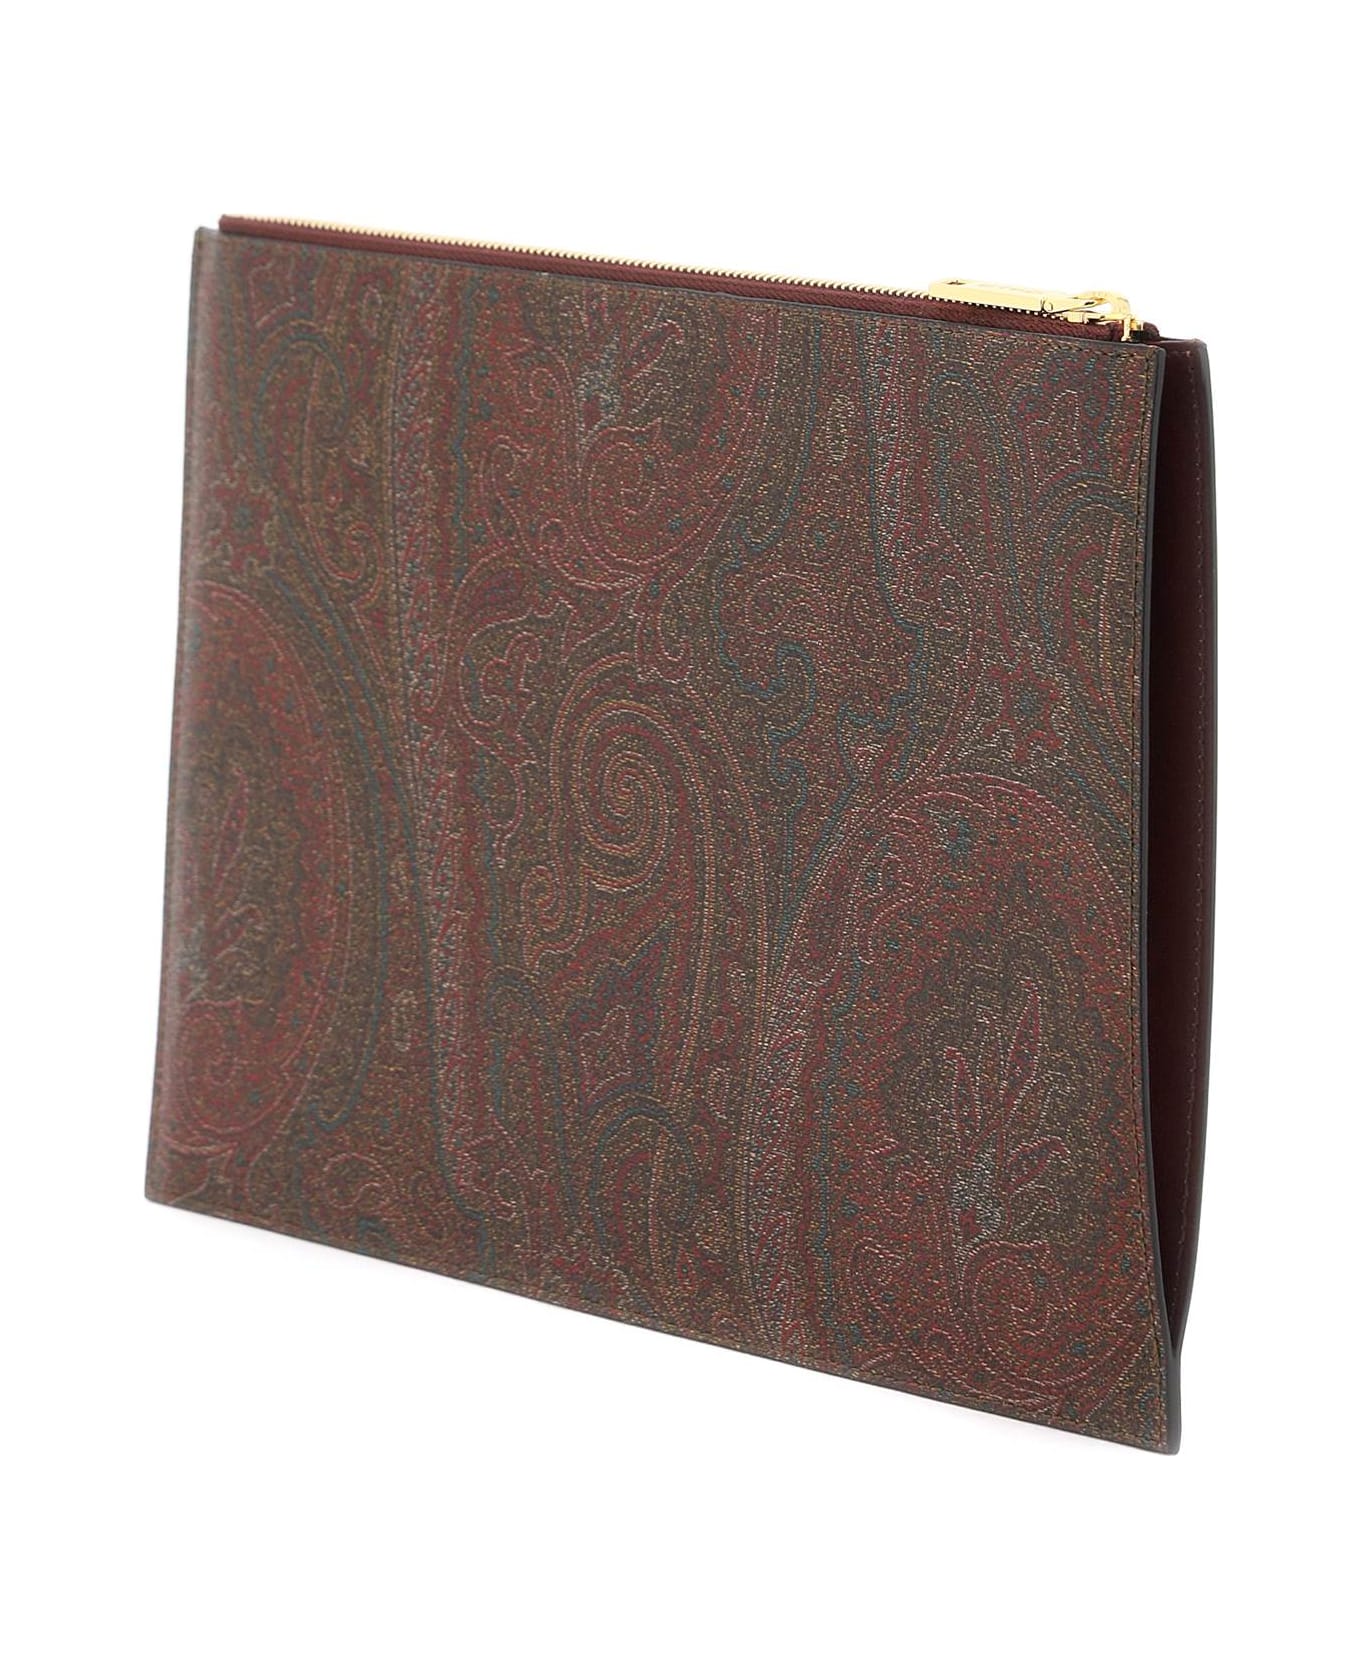 Etro Paisley Pouch With Embroidery - MARRONE 2 (Red)